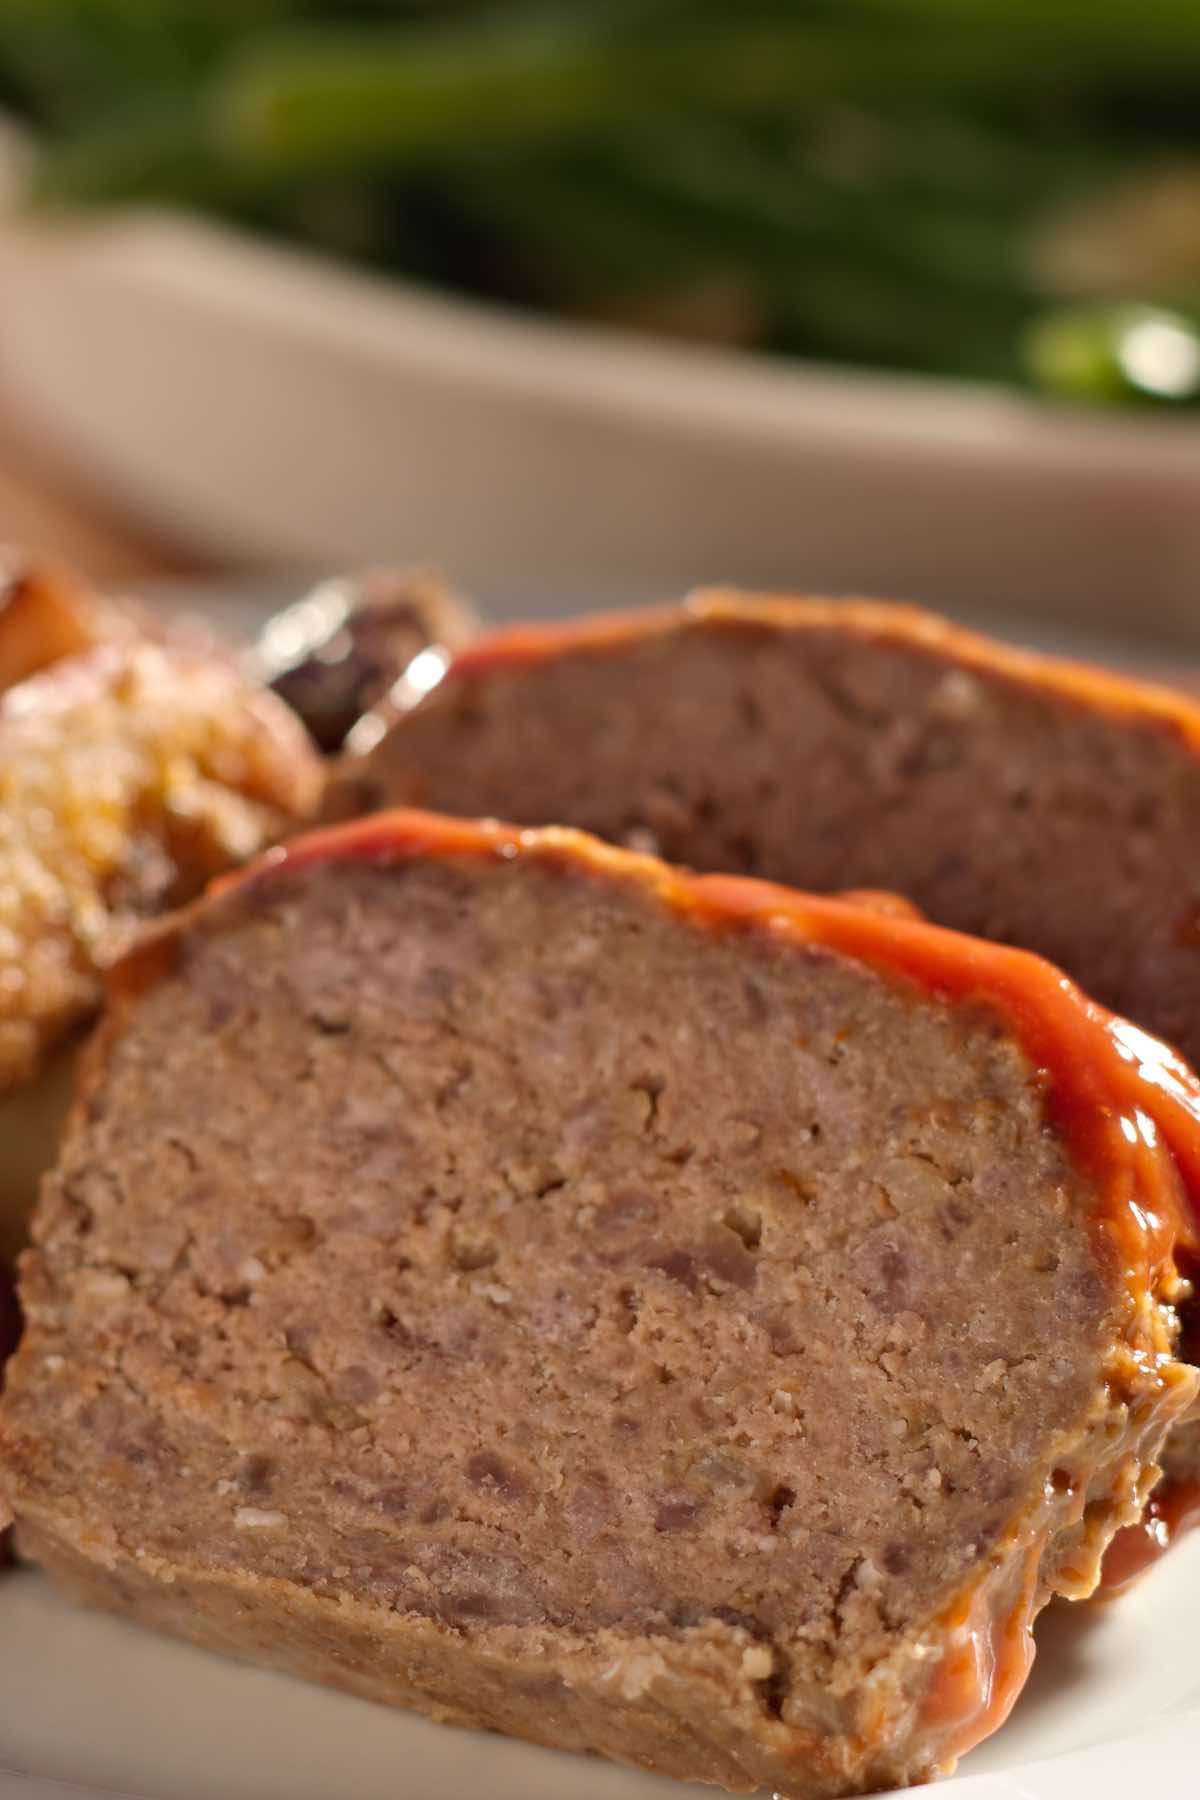 Southern-style Livermush is a surprisingly delicious addition to a hearty breakfast or brunch. Especially popular in North Carolina, this pork-based meatloaf is similar to the sausage patty, but with a smoother texture and a slightly spicy, earthy flavor.